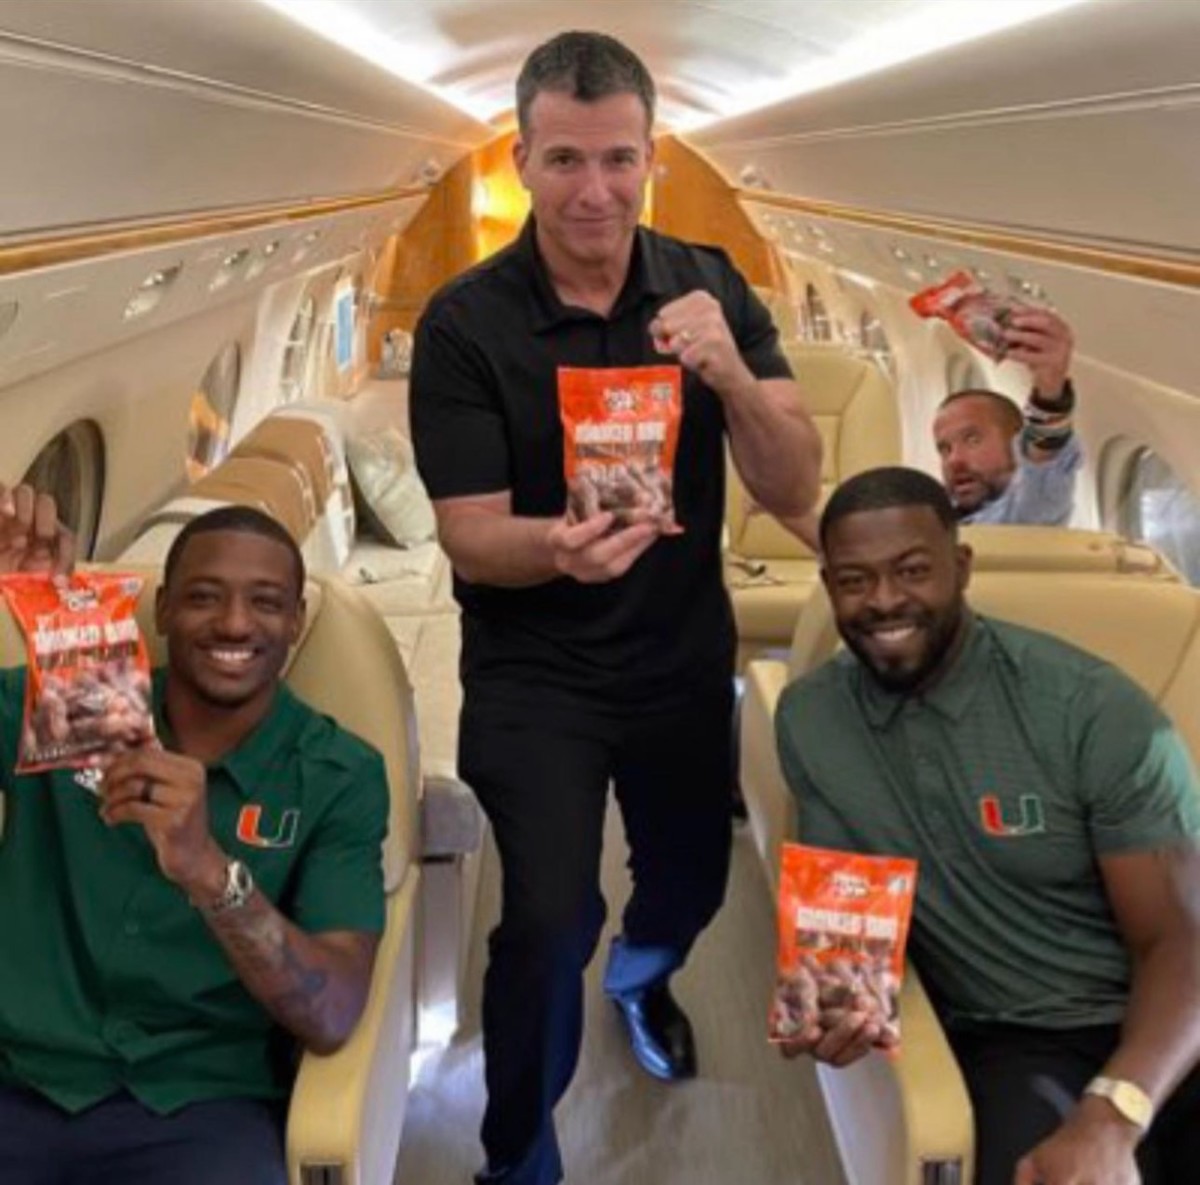 Head coach Mario Cristobal, defensive back coaches Demarcus VanDyke and Jahmile Addae along with analyst Dennis Smith posed with the famous peanuts on a recruiting trip.